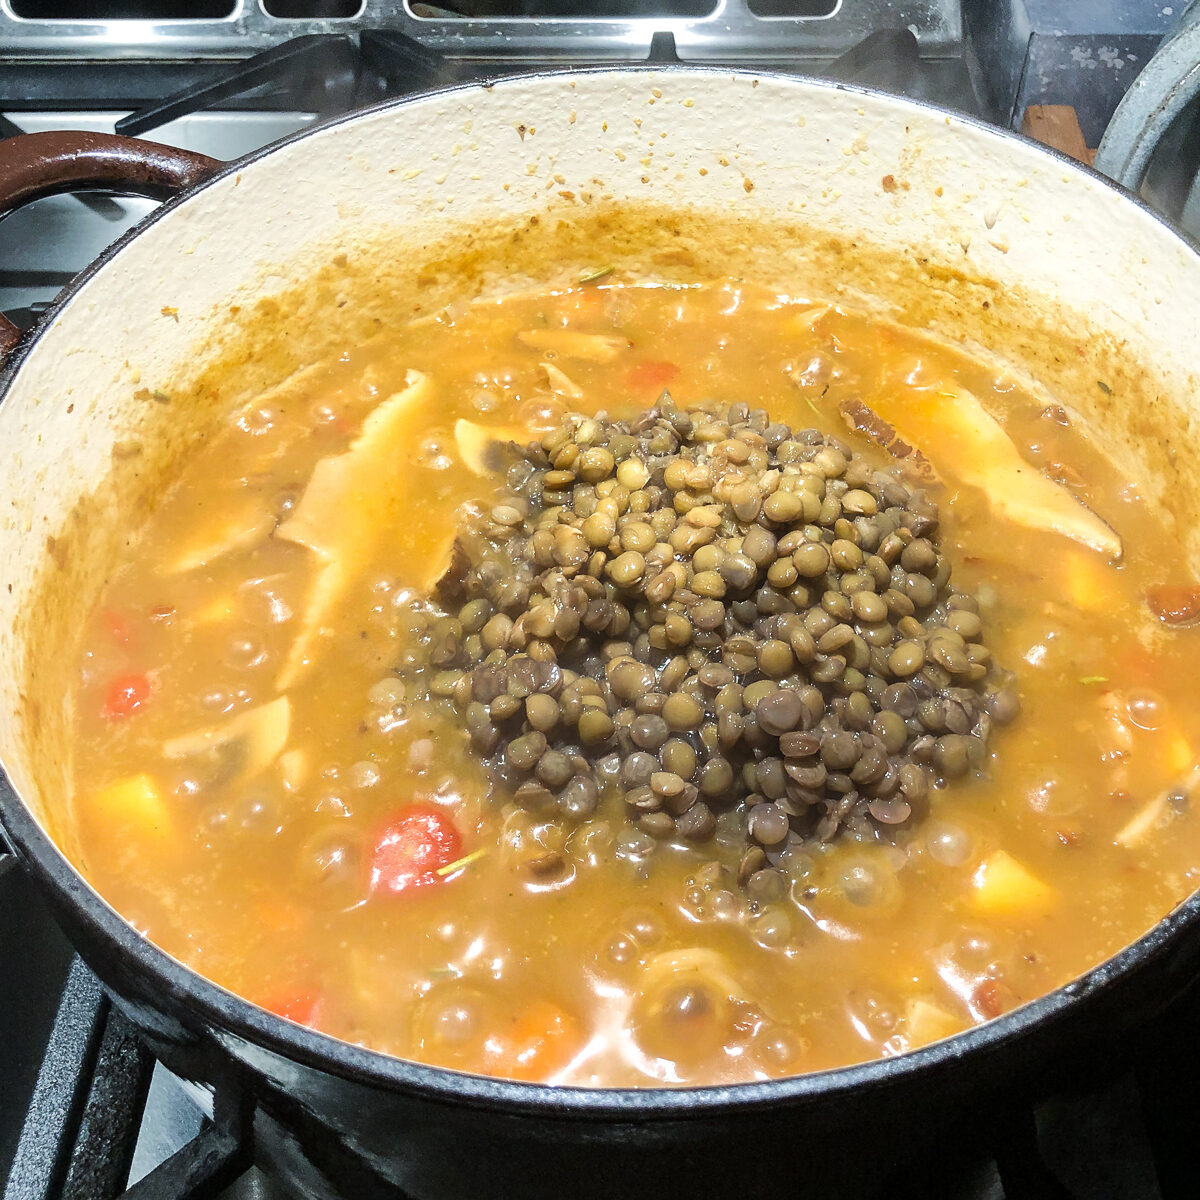 Mushroom stew with lentils poured in on top.